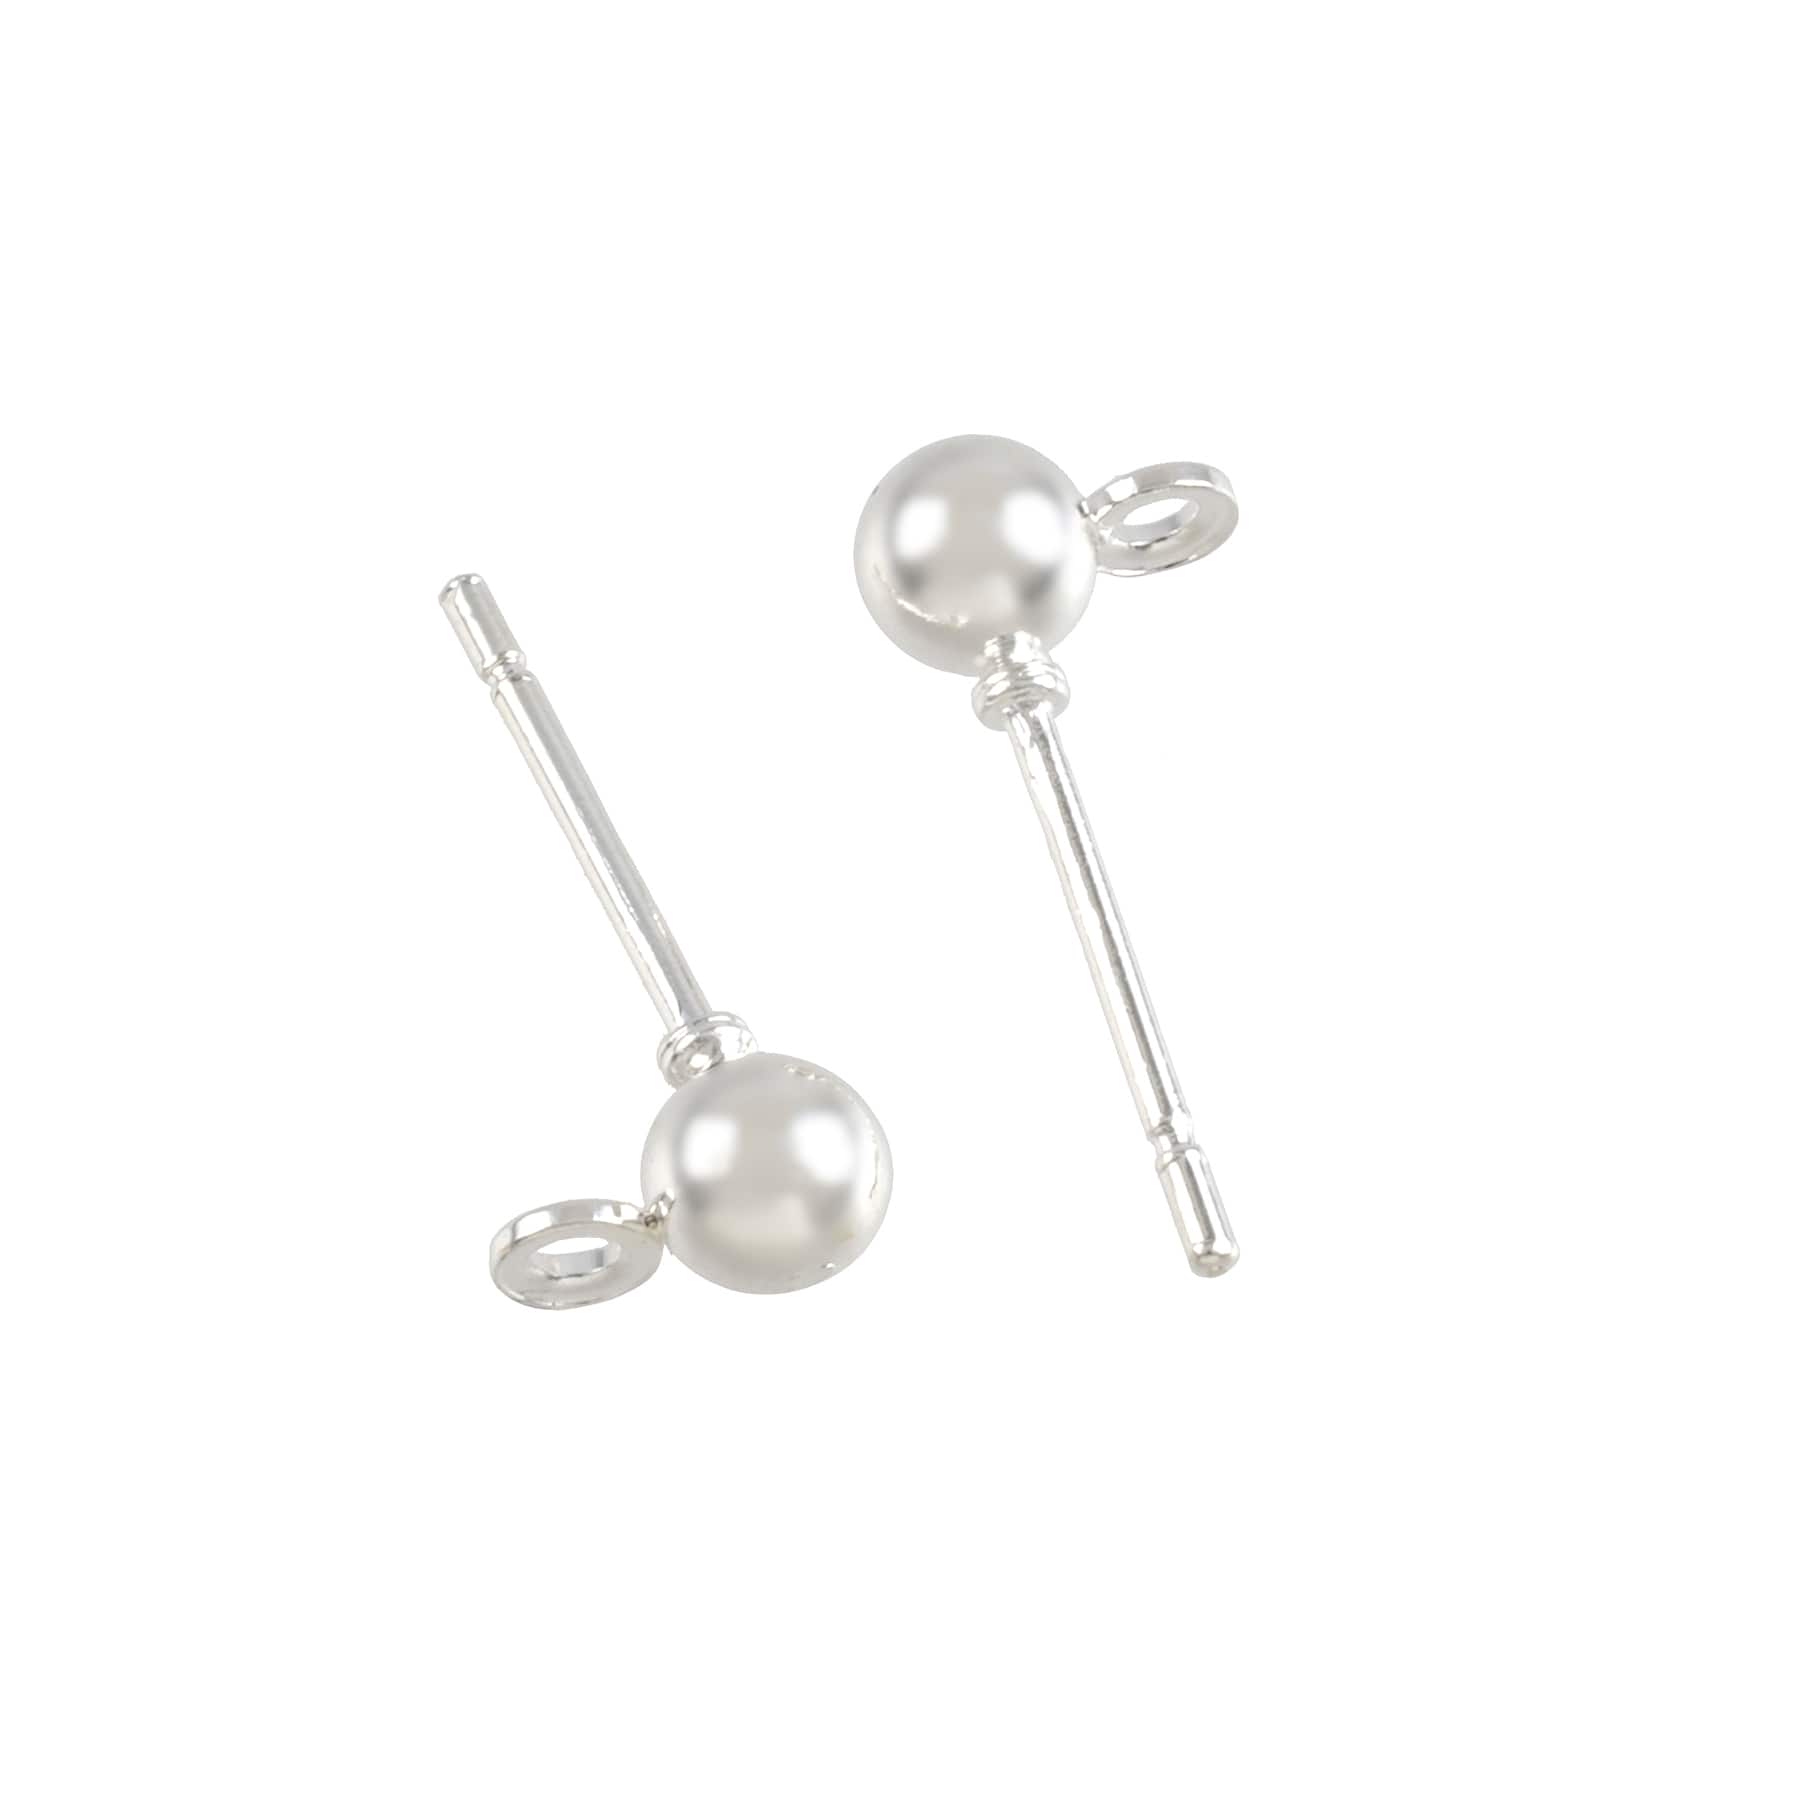 12 Pack: Gold Earring Post Ball Tops, 4mm by Bead Landing™